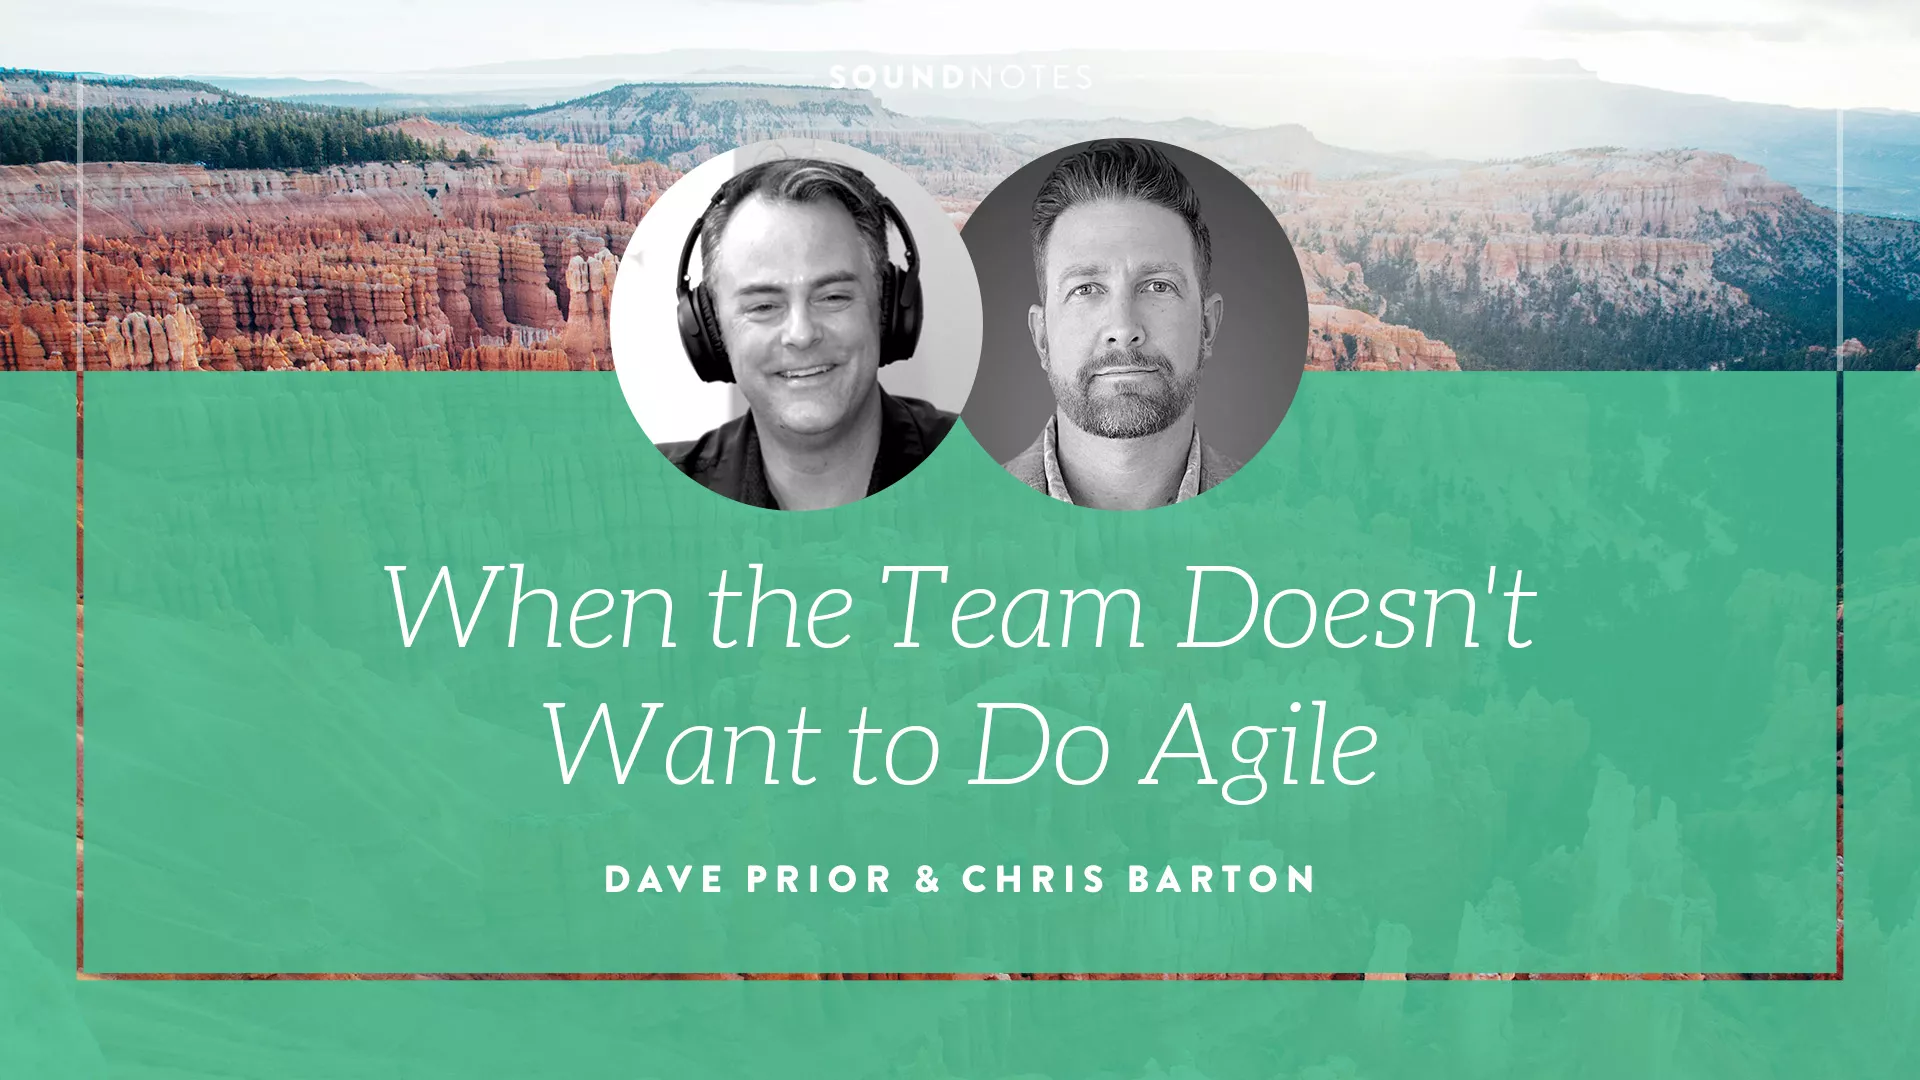 How Do I Get My Team to Want to Do Agile When They Don’t Want to Do Agile?